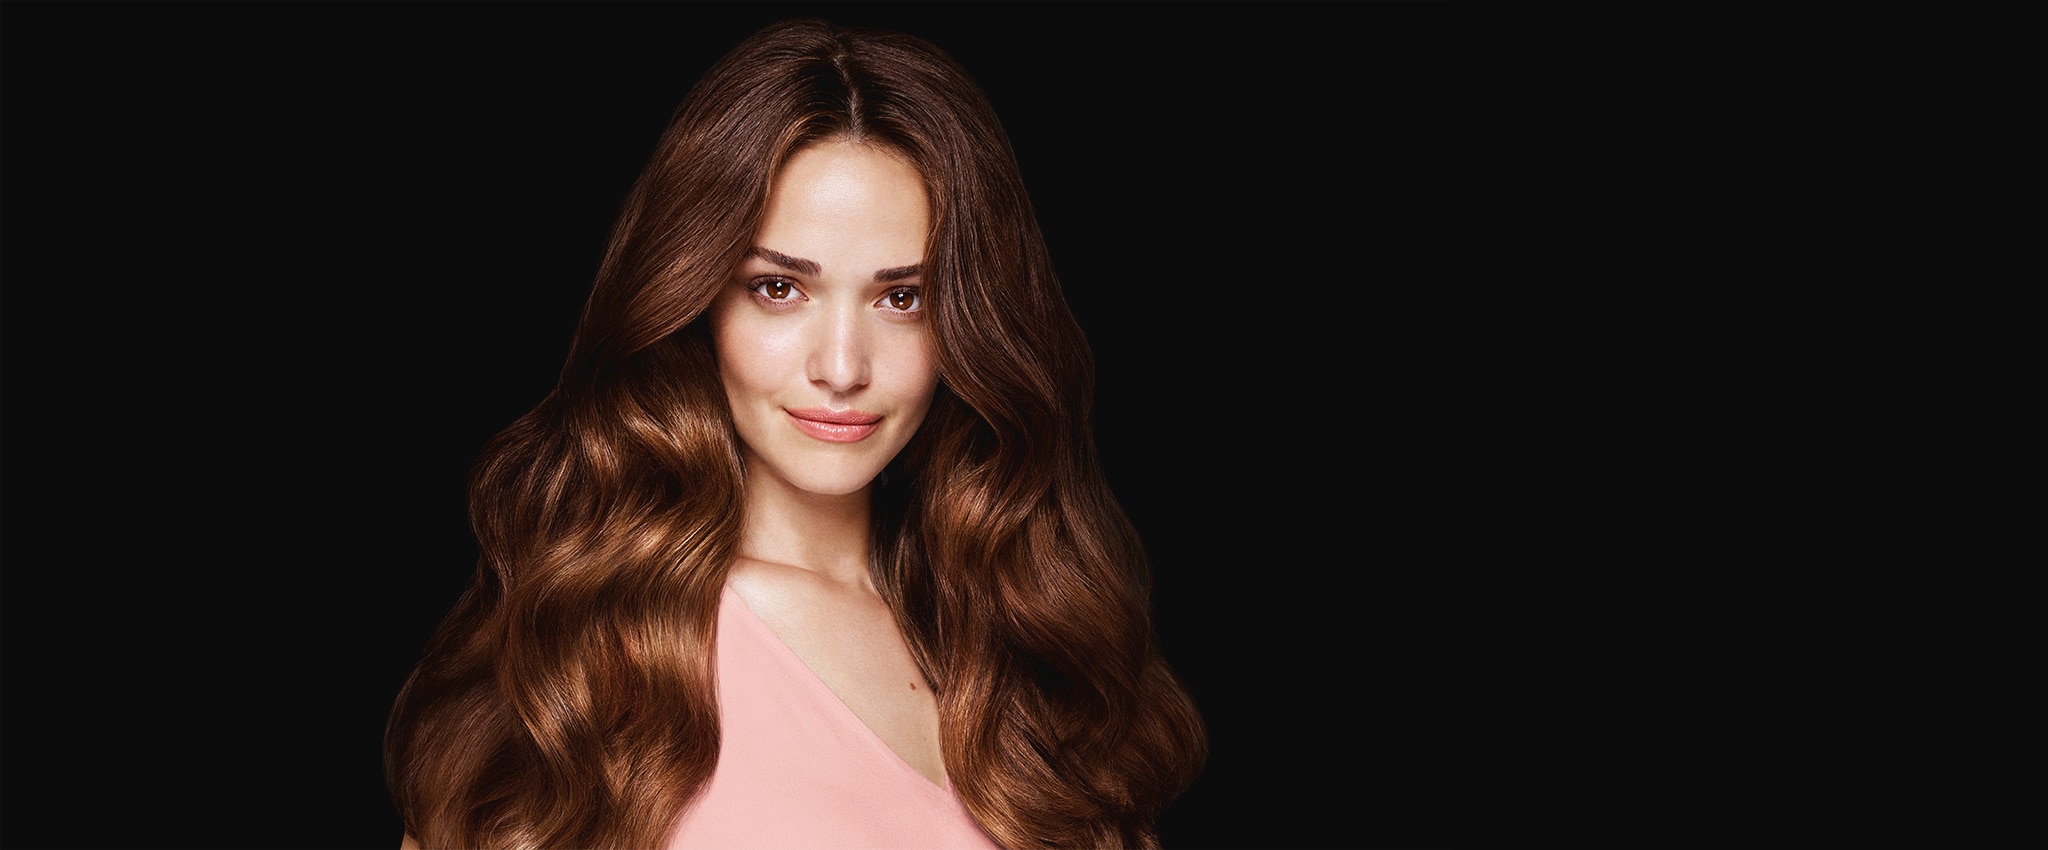 Get Sleek Hair With These Easy Tips